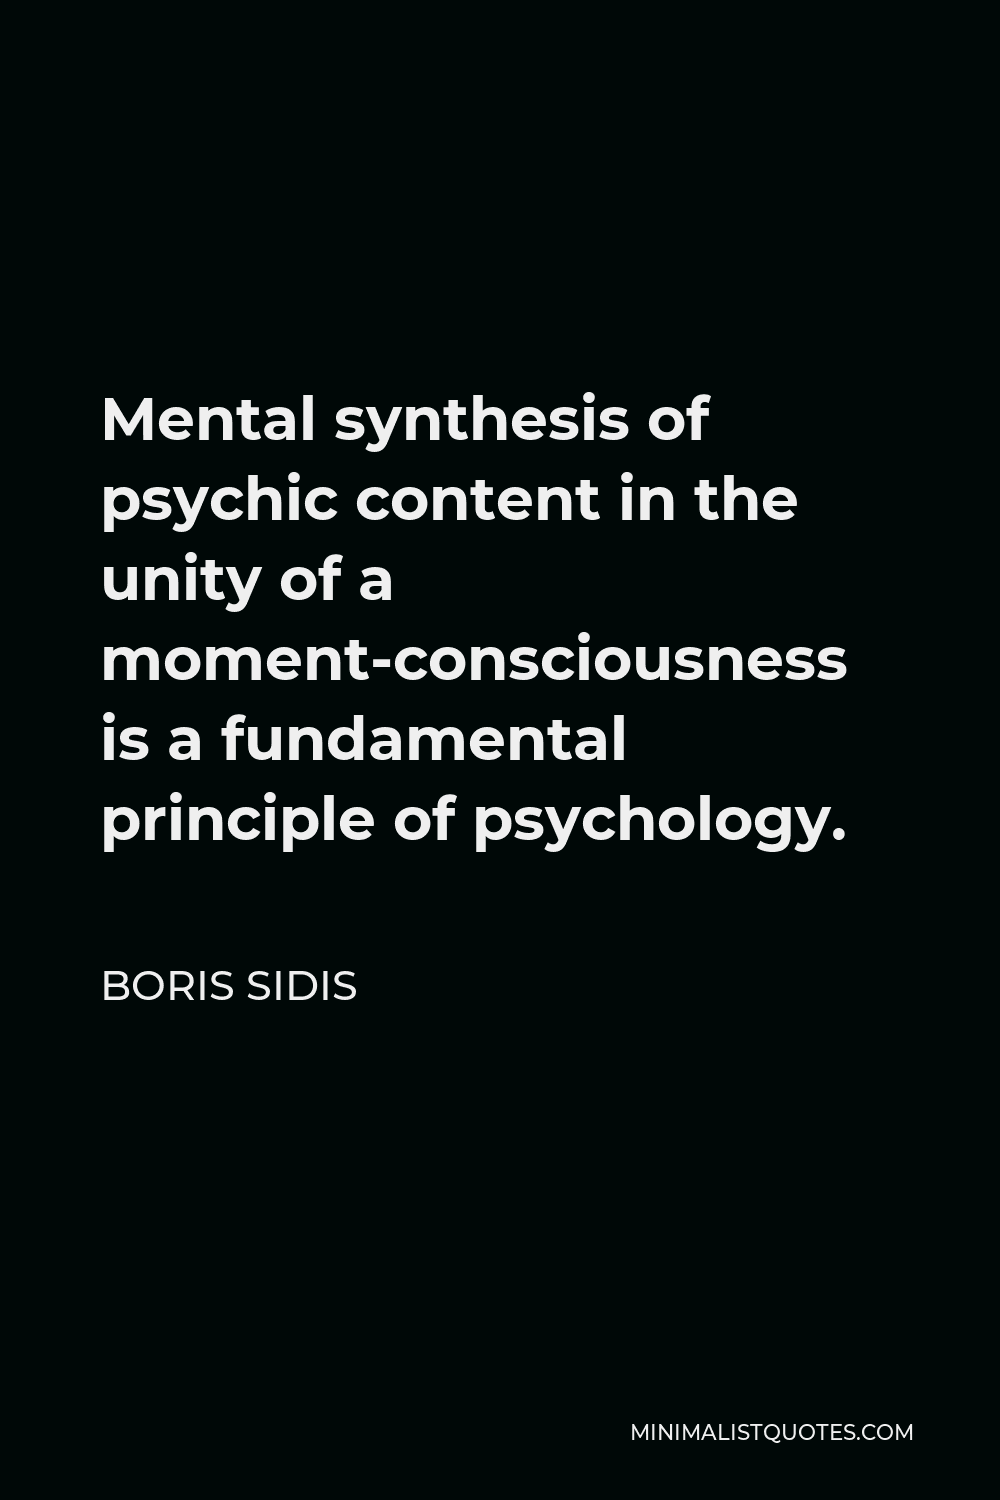 Boris Sidis Quote - Mental synthesis of psychic content in the unity of a moment-consciousness is a fundamental principle of psychology.